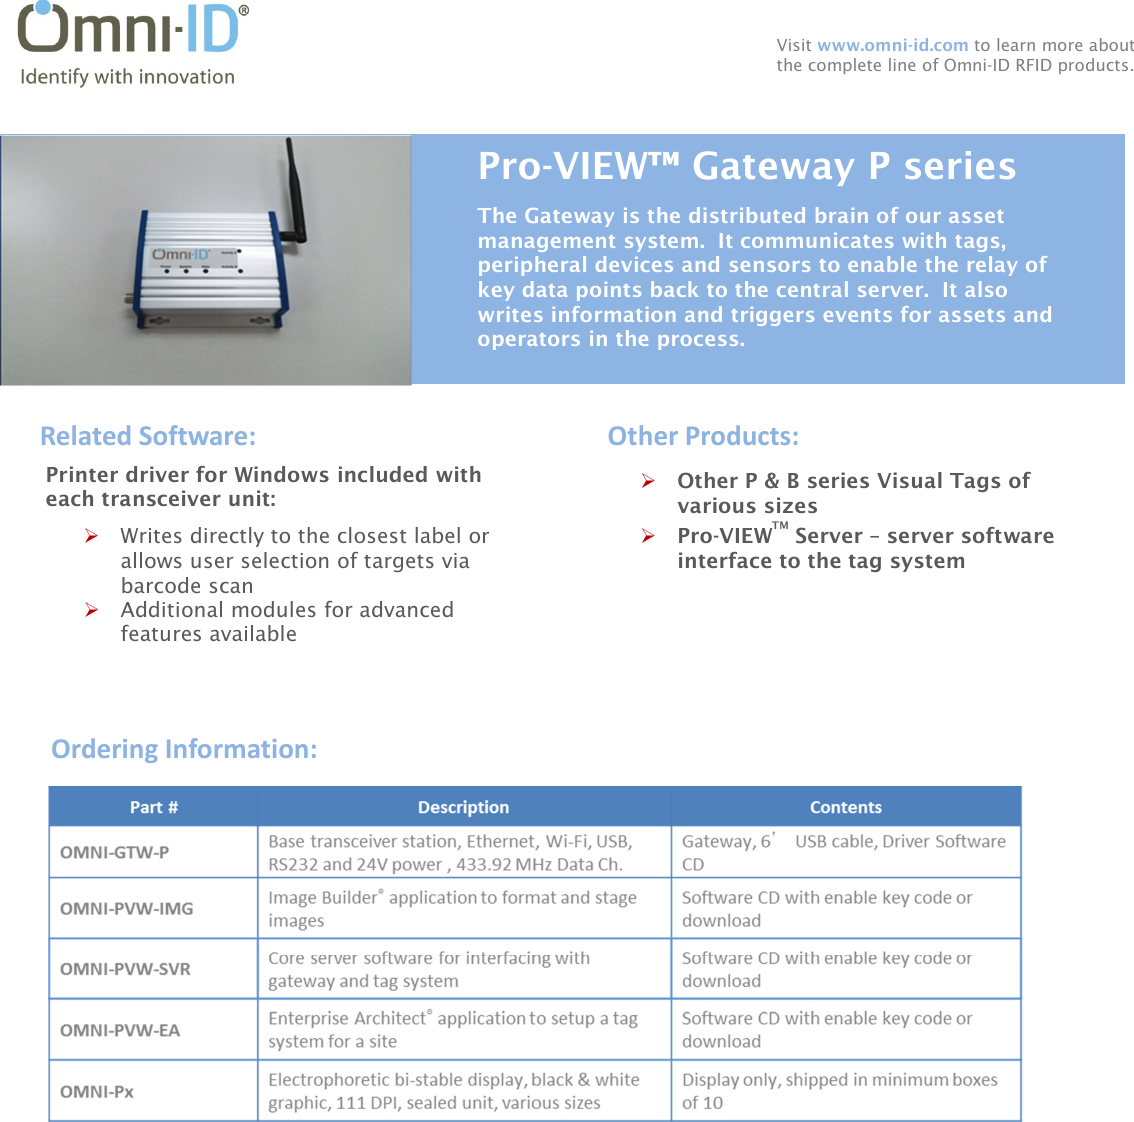  Visit www.omni-id.com to learn more about the complete line of Omni-ID RFID products. Related Software:   Printer driver for Windows included with each transceiver unit:  Writes directly to the closest label or allows user selection of targets via barcode scan  Additional modules for advanced features available  Other P &amp; B series Visual Tags of various sizes  Pro-VIEWTM Server – server software interface to the tag system Other Products:   Ordering Information: Pro-VIEW™ Gateway P series The Gateway is the distributed brain of our asset management system.  It communicates with tags, peripheral devices and sensors to enable the relay of key data points back to the central server.  It also writes information and triggers events for assets and operators in the process.  